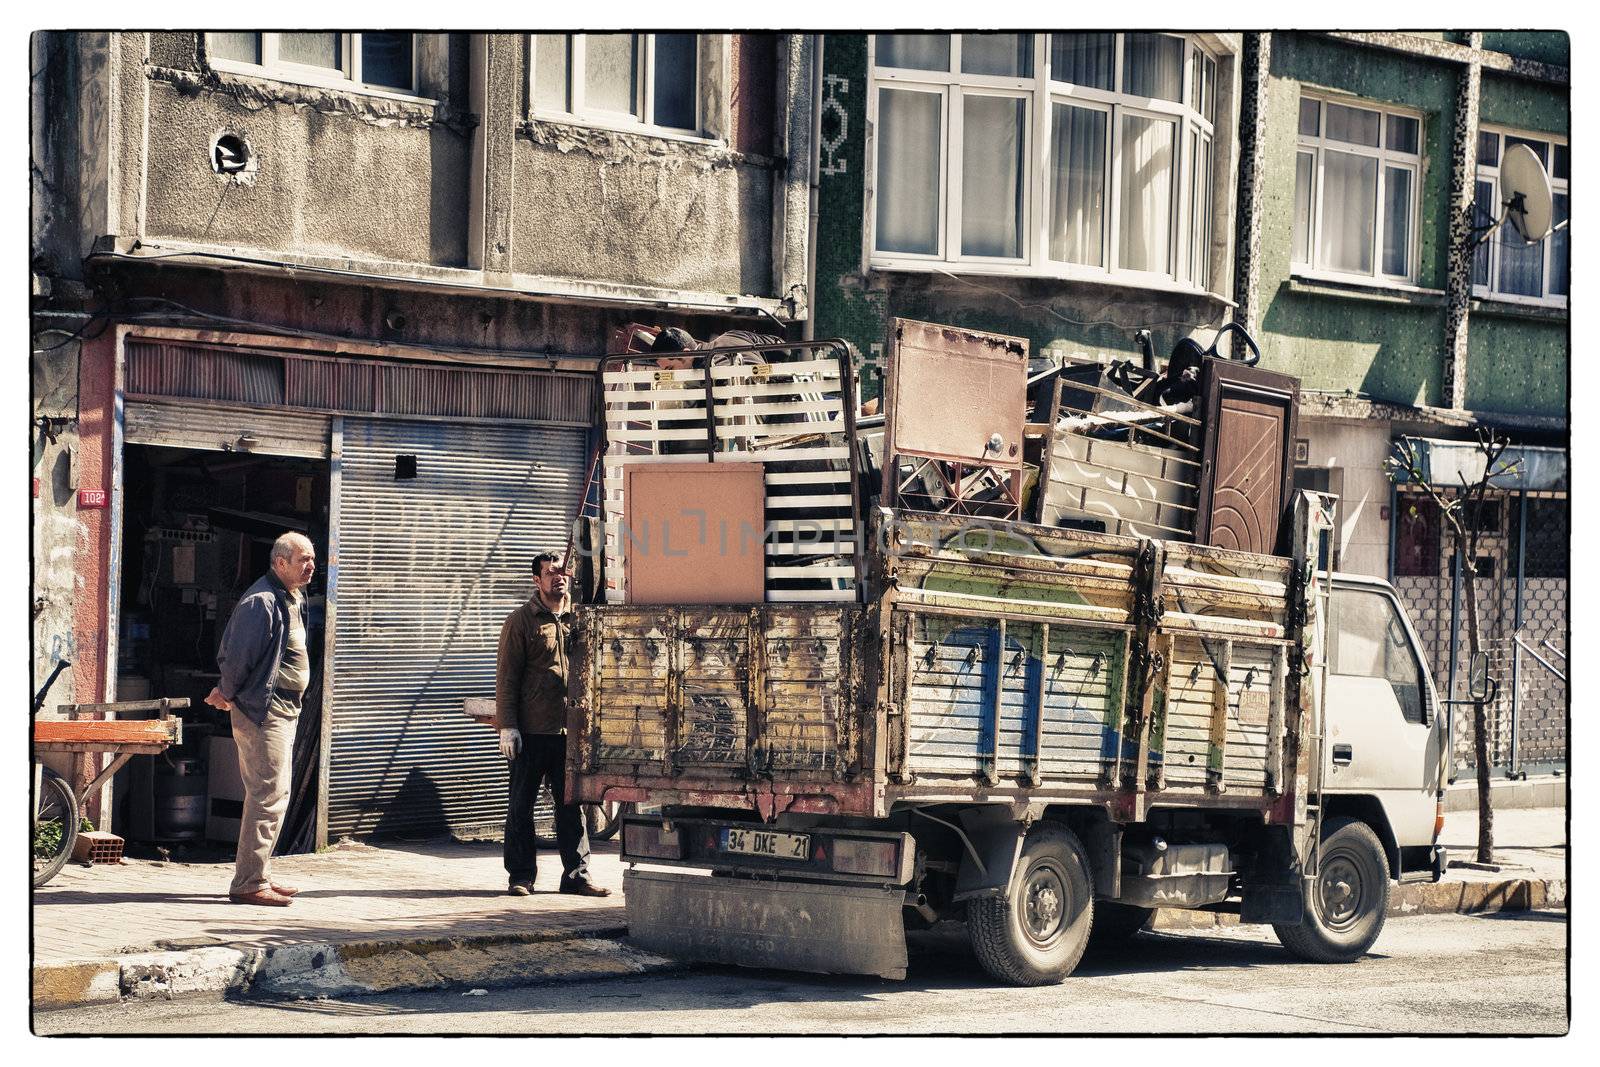 HEAVY LOADED TRUCK, ISTANBUL, TURKEY, APRIL 13, 2012: Scrap tradesman with high loaded truck in the Eyup area.